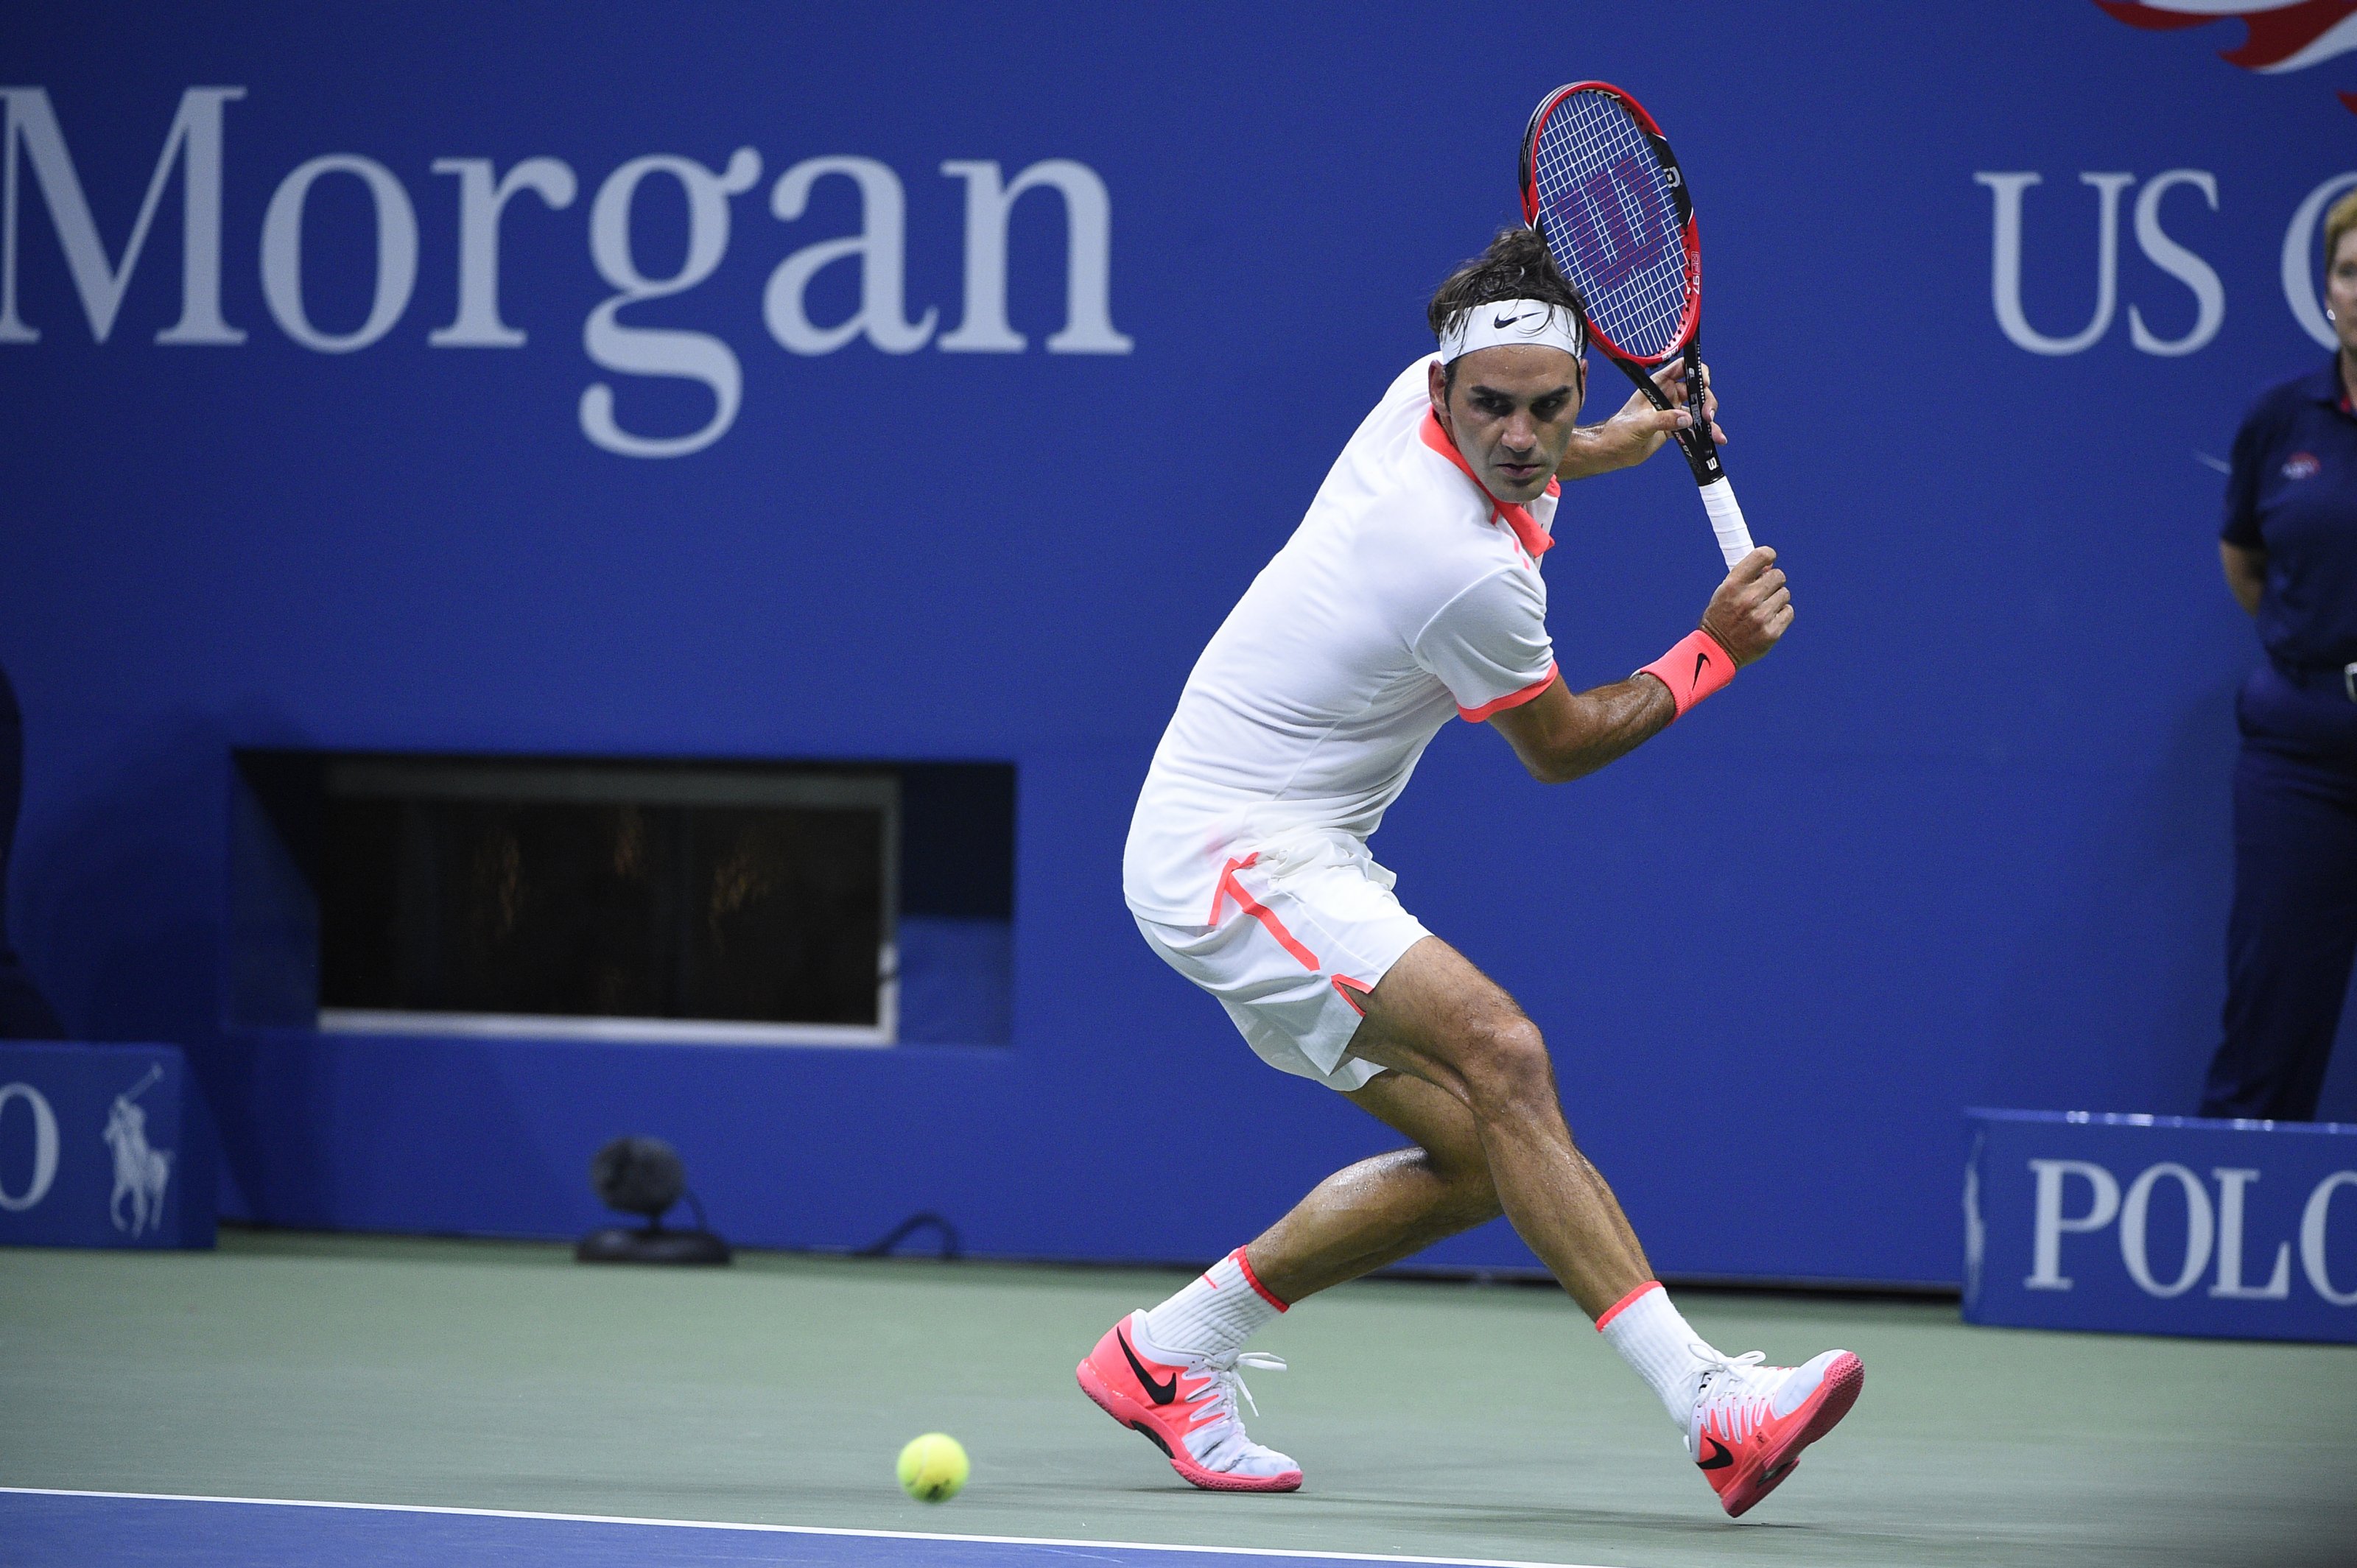 Roger Federer of Switzerland plays his second round match at the US Open at the USTA Billie Jean King National Tennis Center in the Flushing neighborhood of the Queens borough of New York City, NY, USA on September 3, 2015. Photo by Corinne Dubreuil/ABACAPRESS.COM